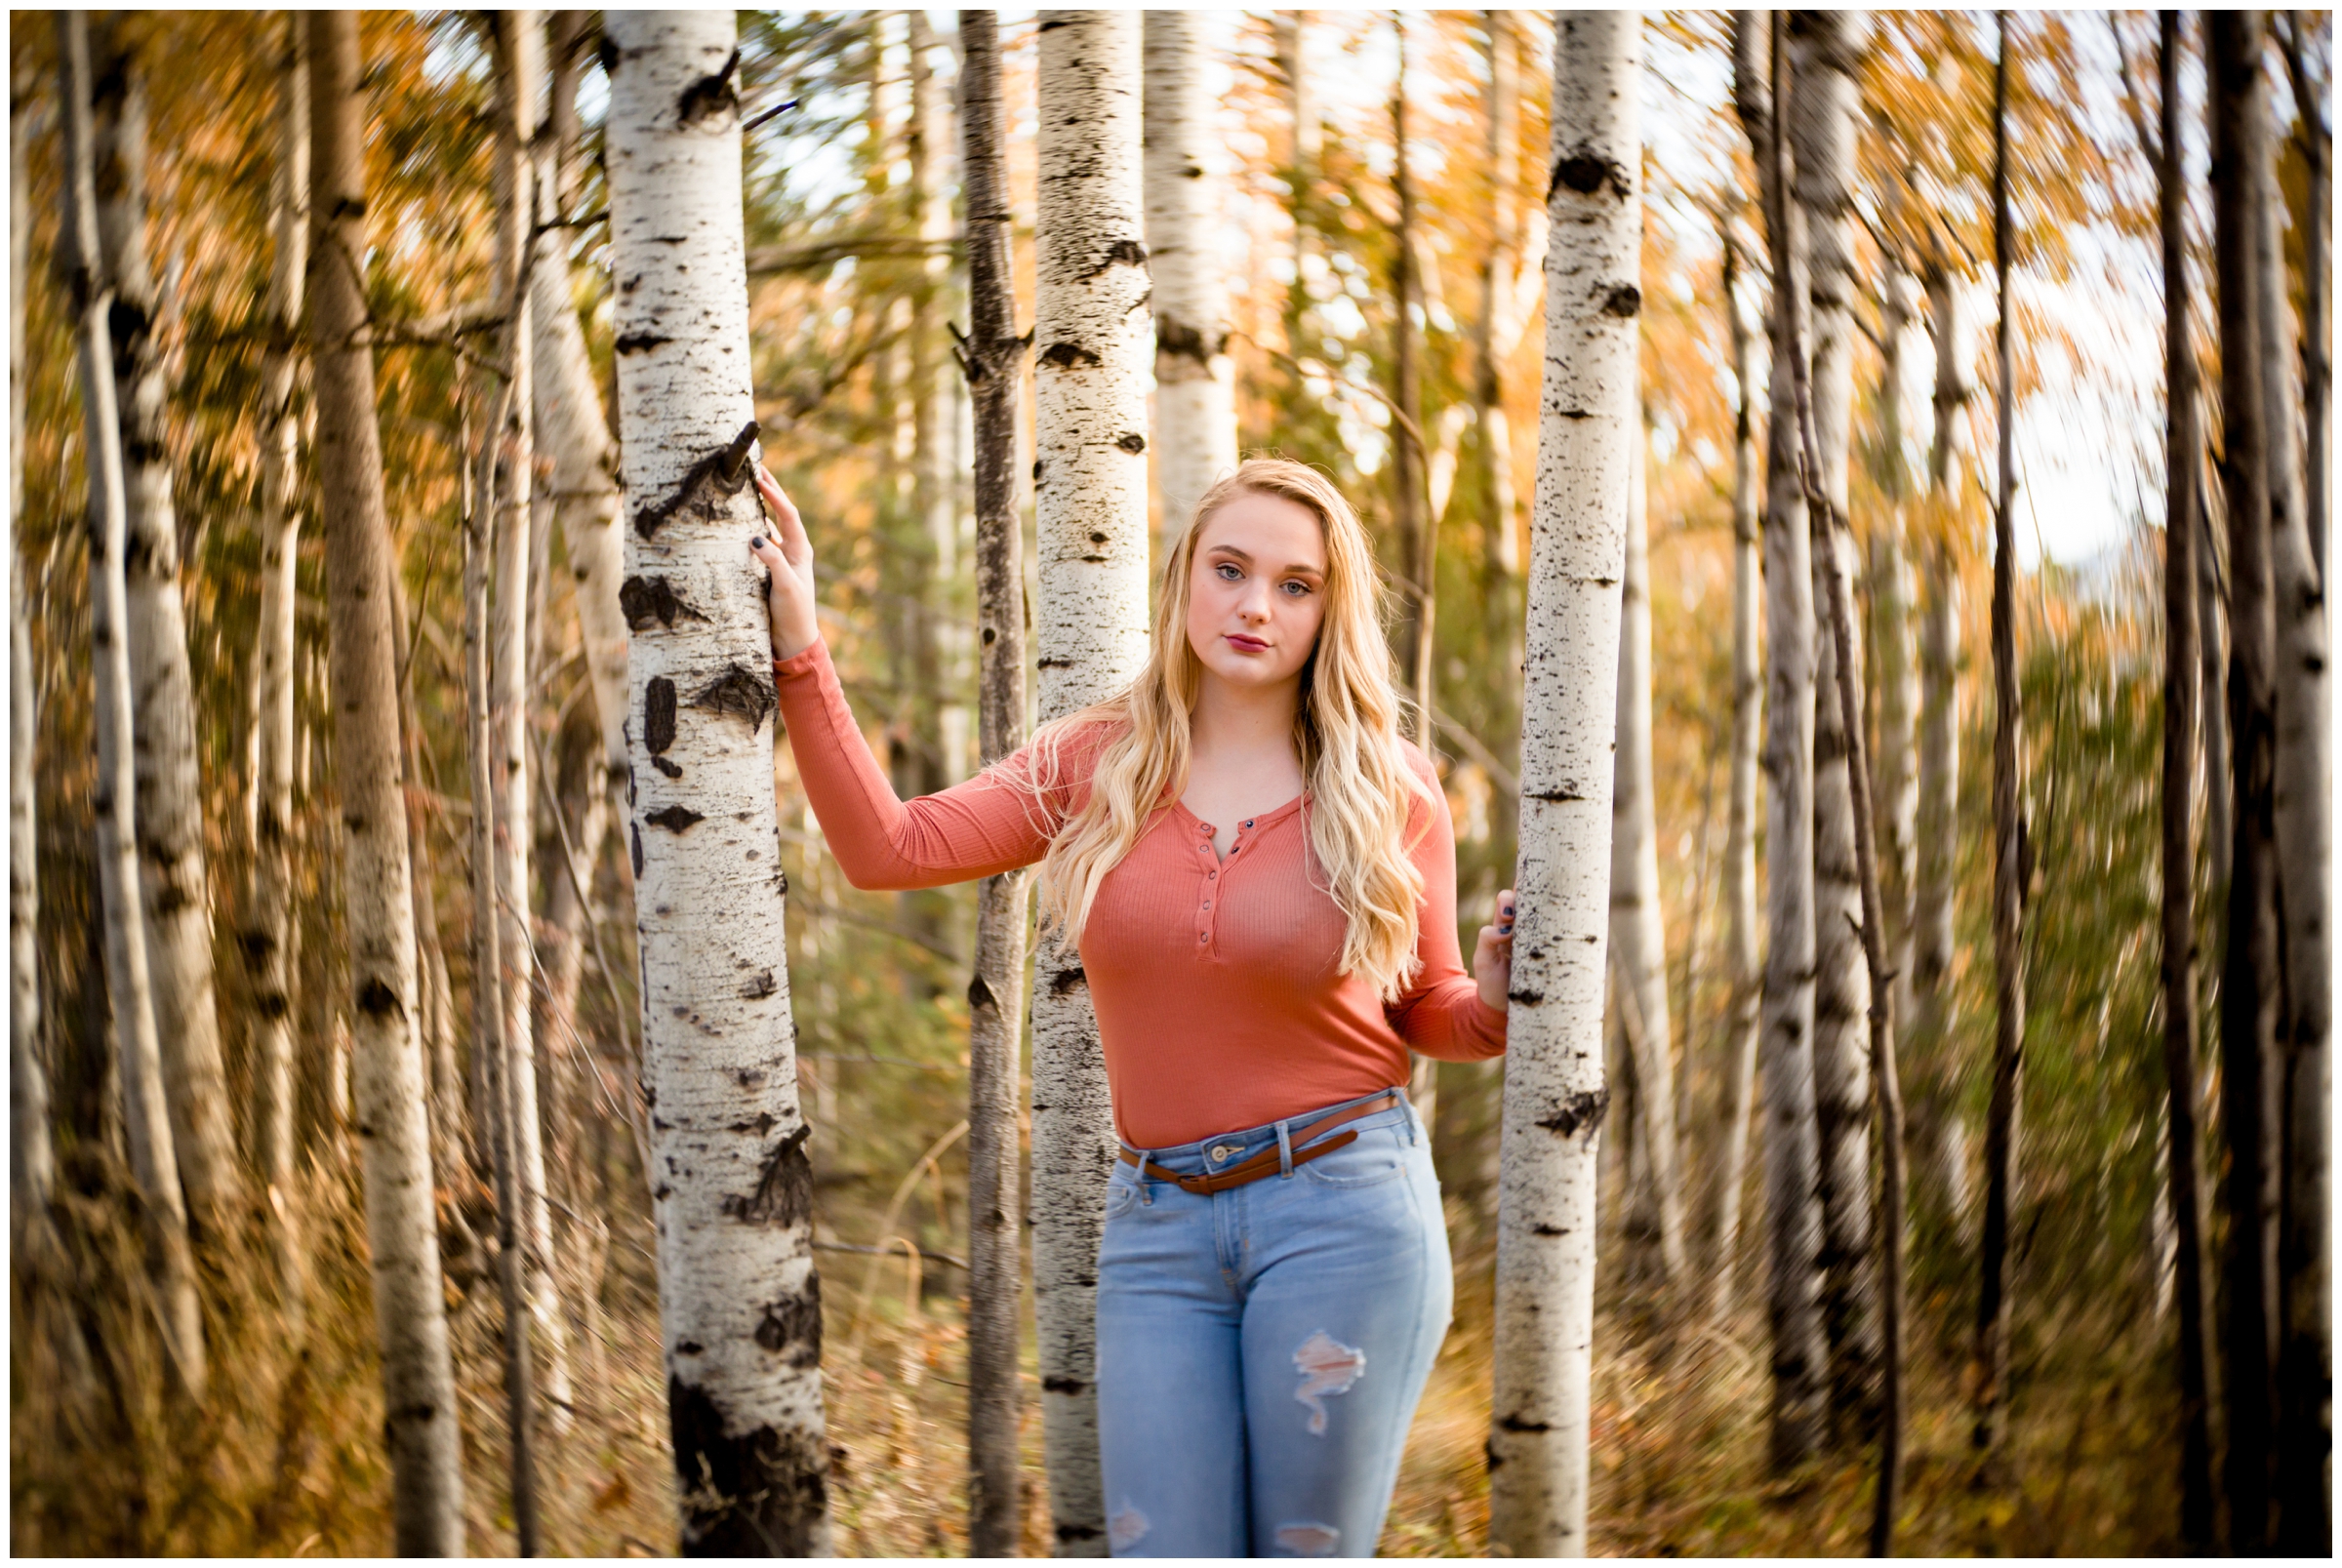 photo of teen in aspen grove with lensbaby twist lens